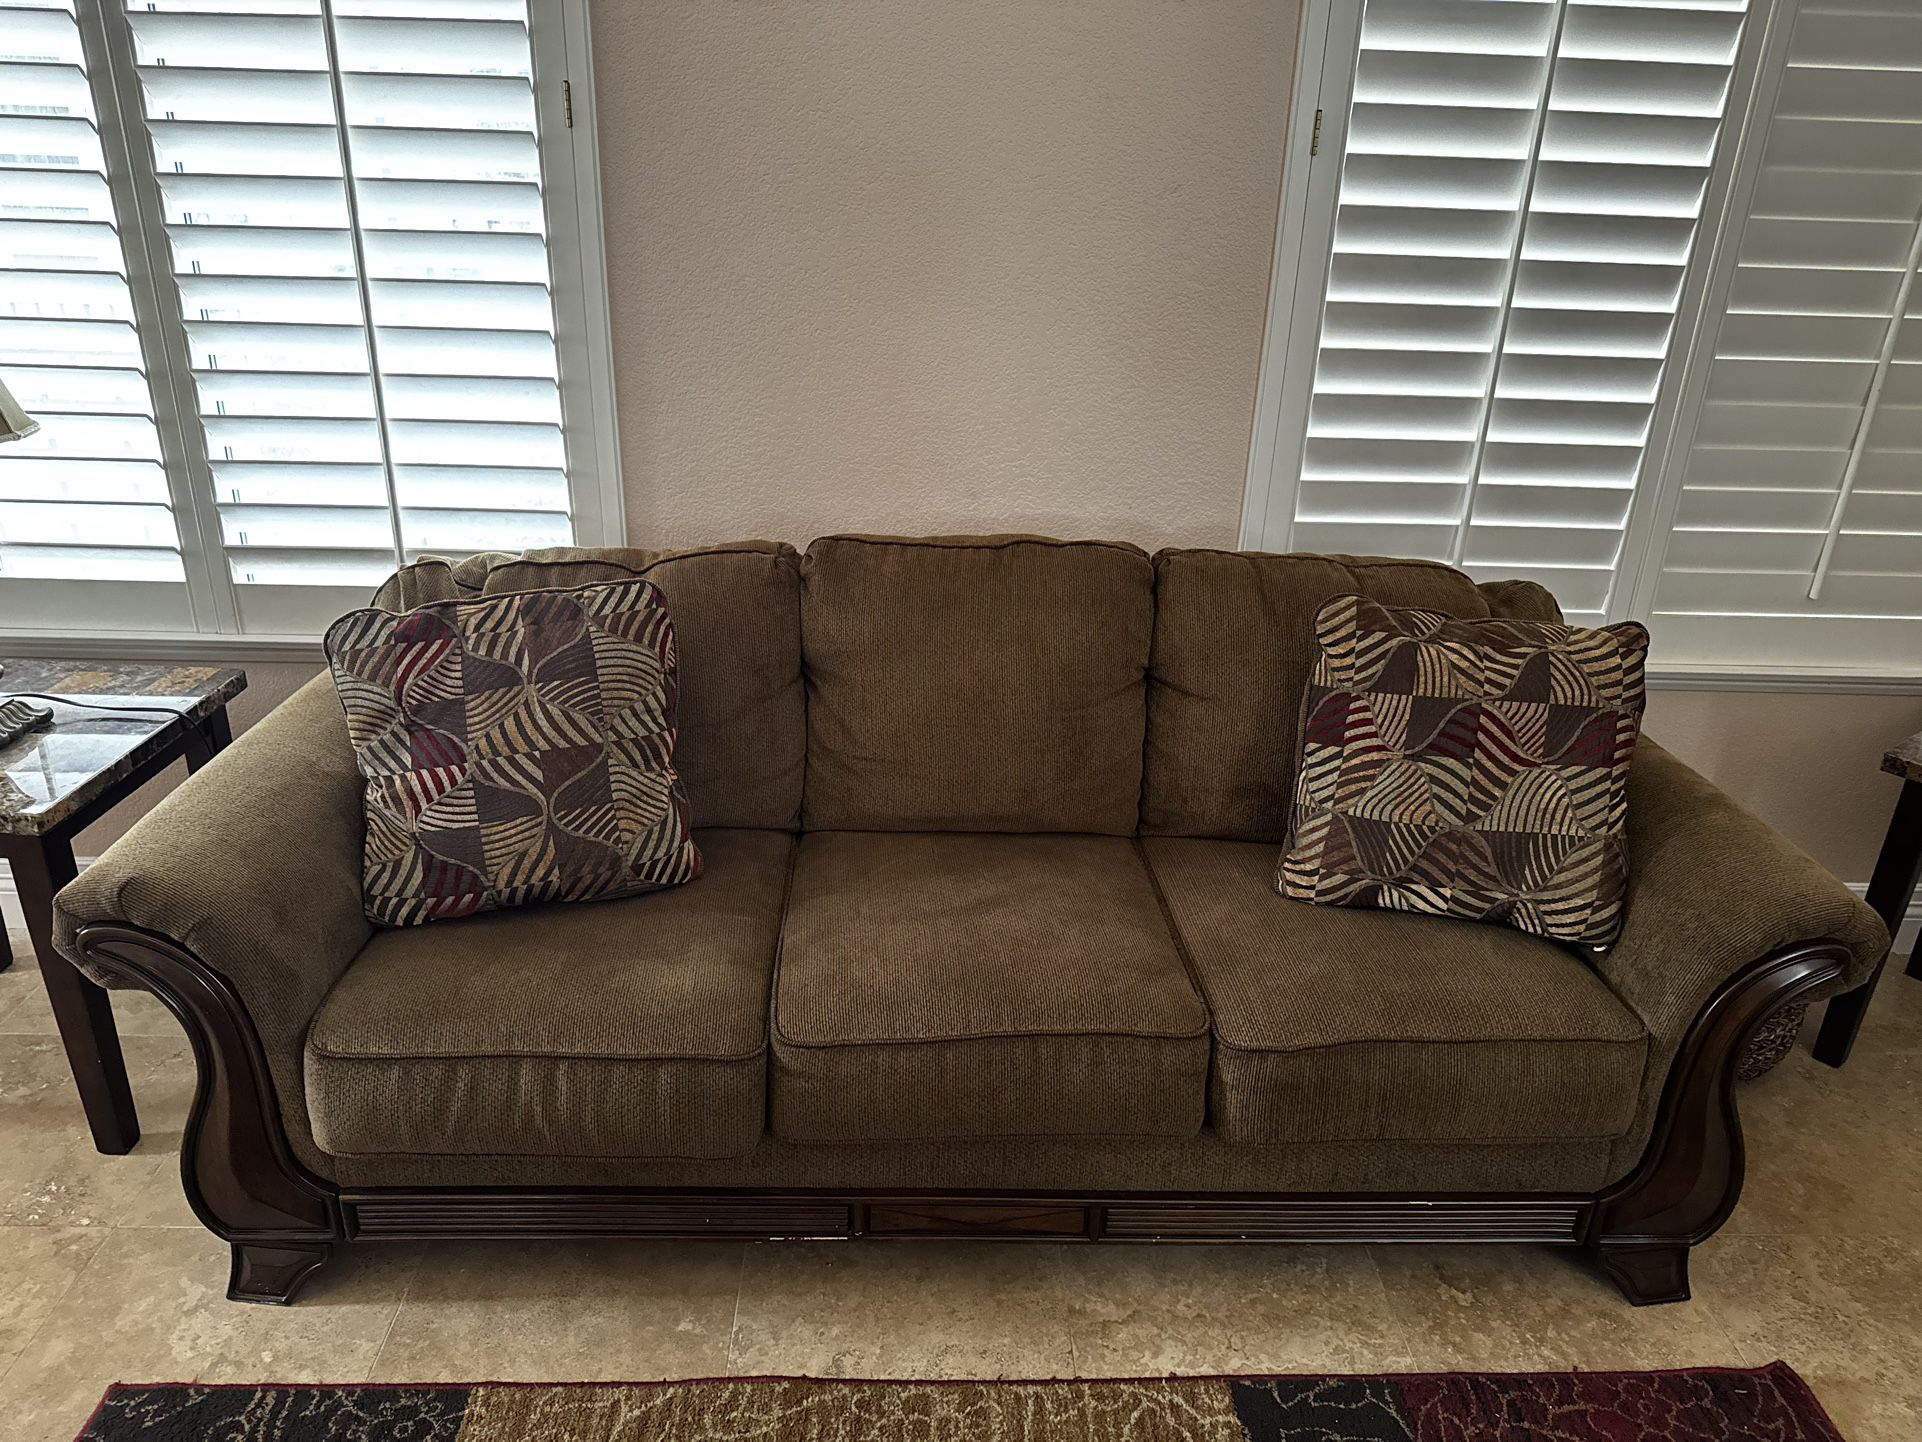 Sofa Set Must Pick Up Today 4/24 